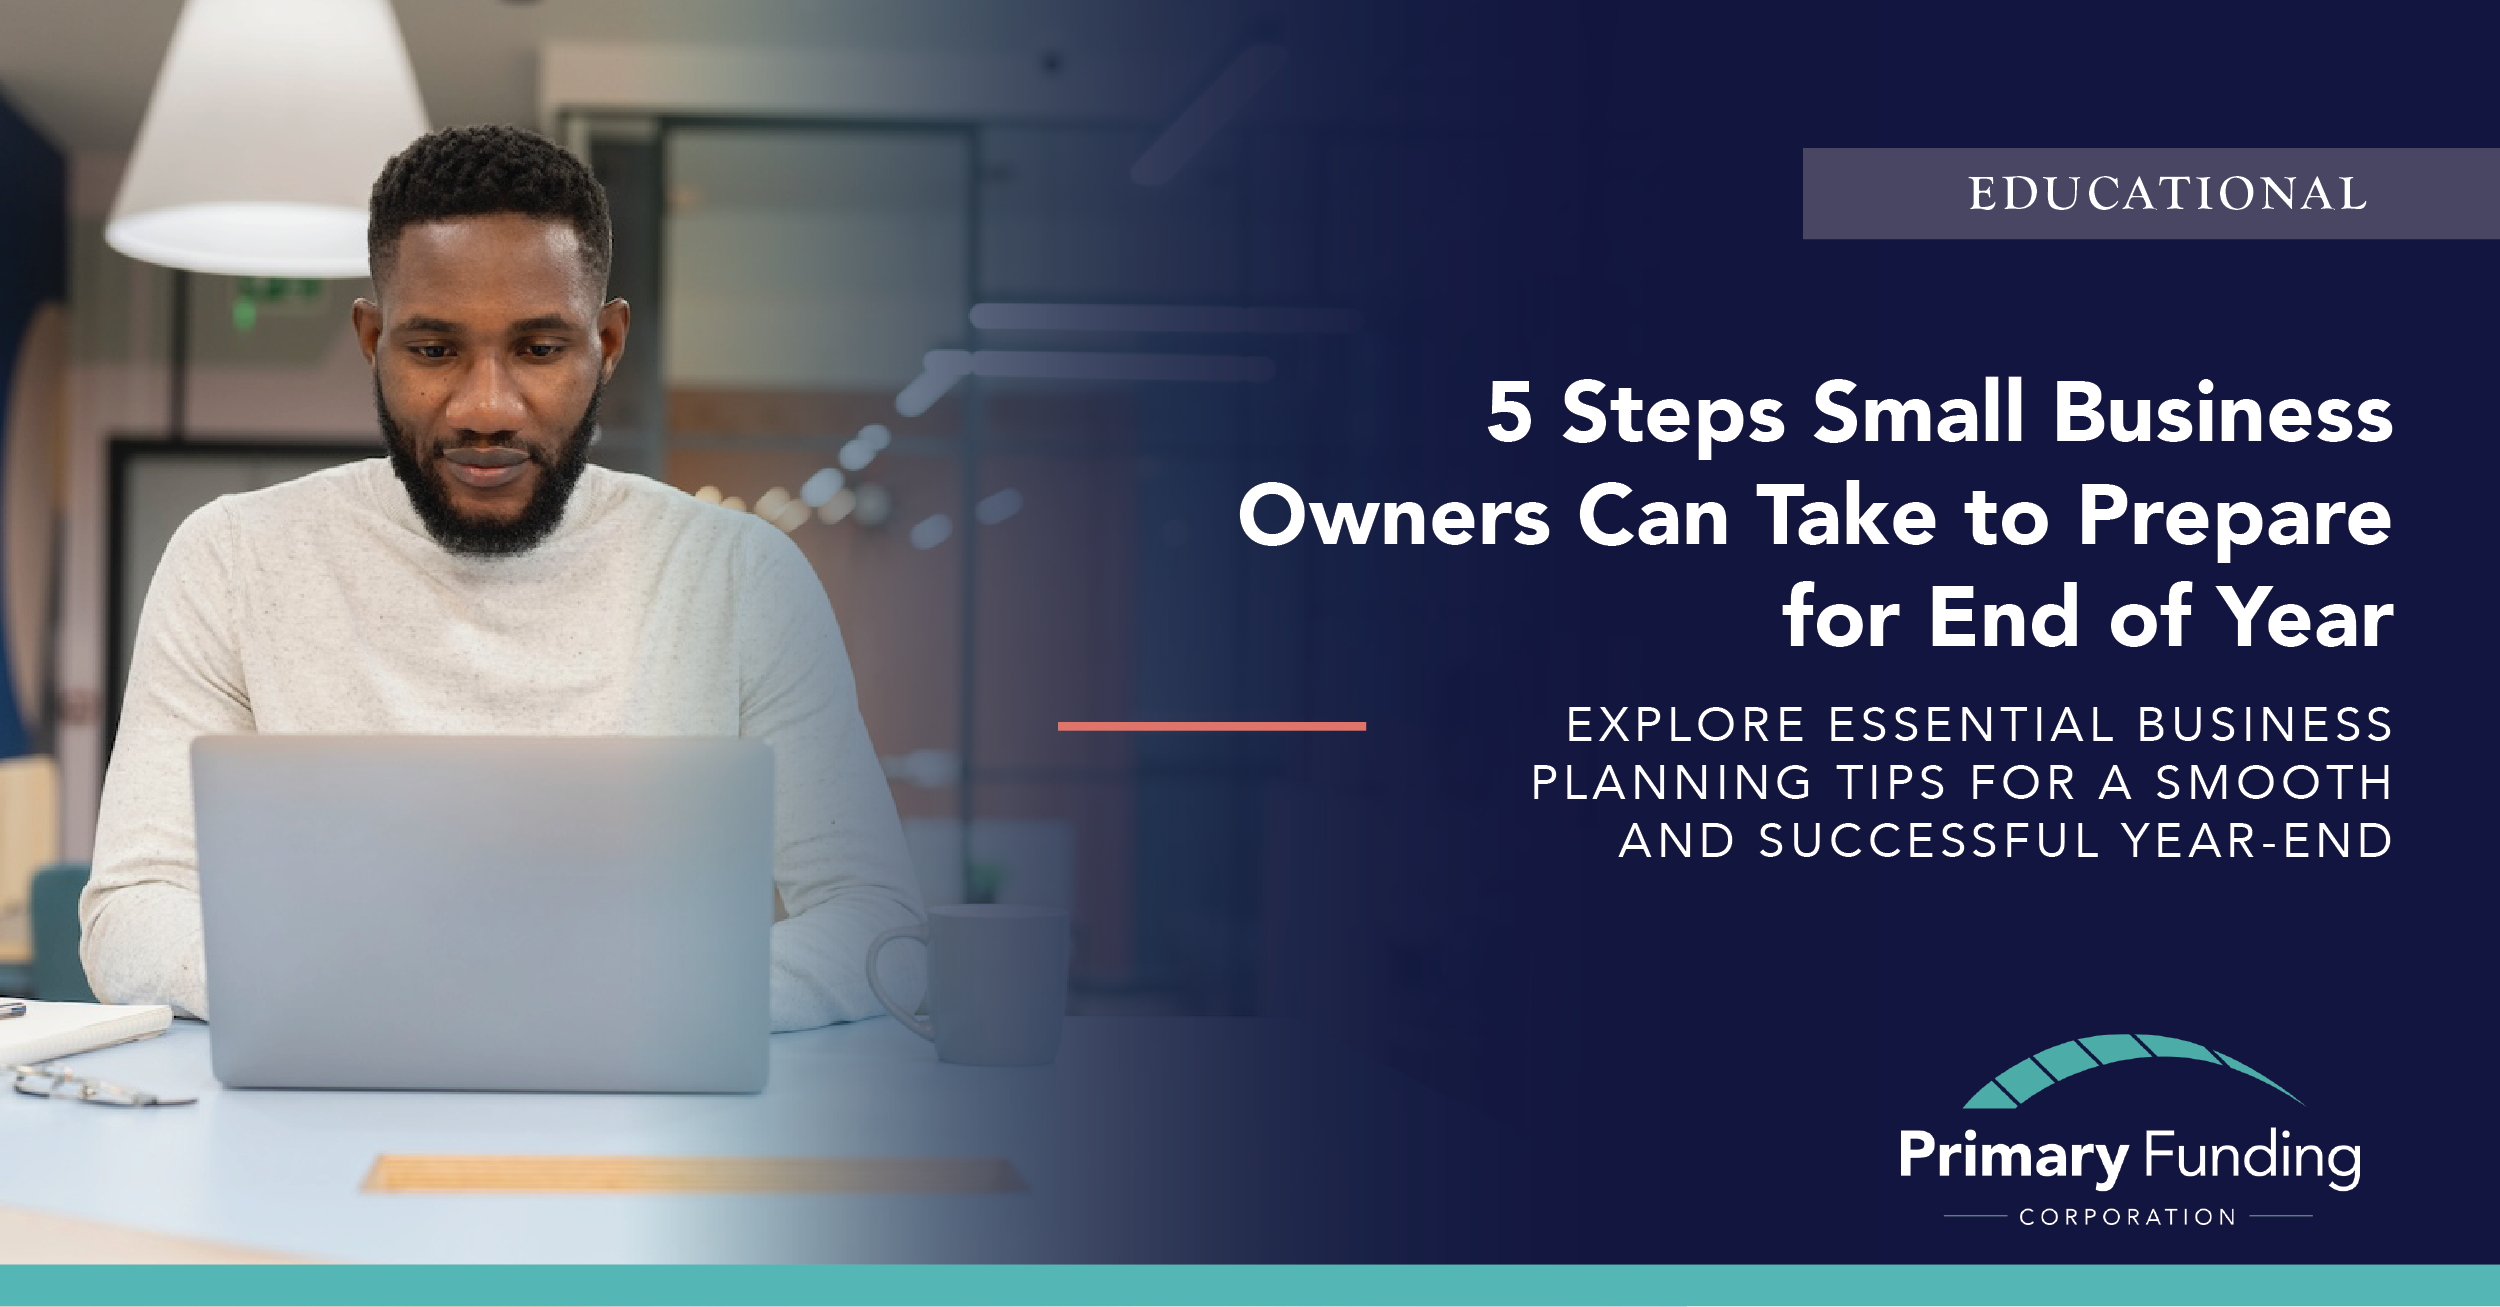 5 Steps Small Business Owners Can Take to Prepare for End of Year